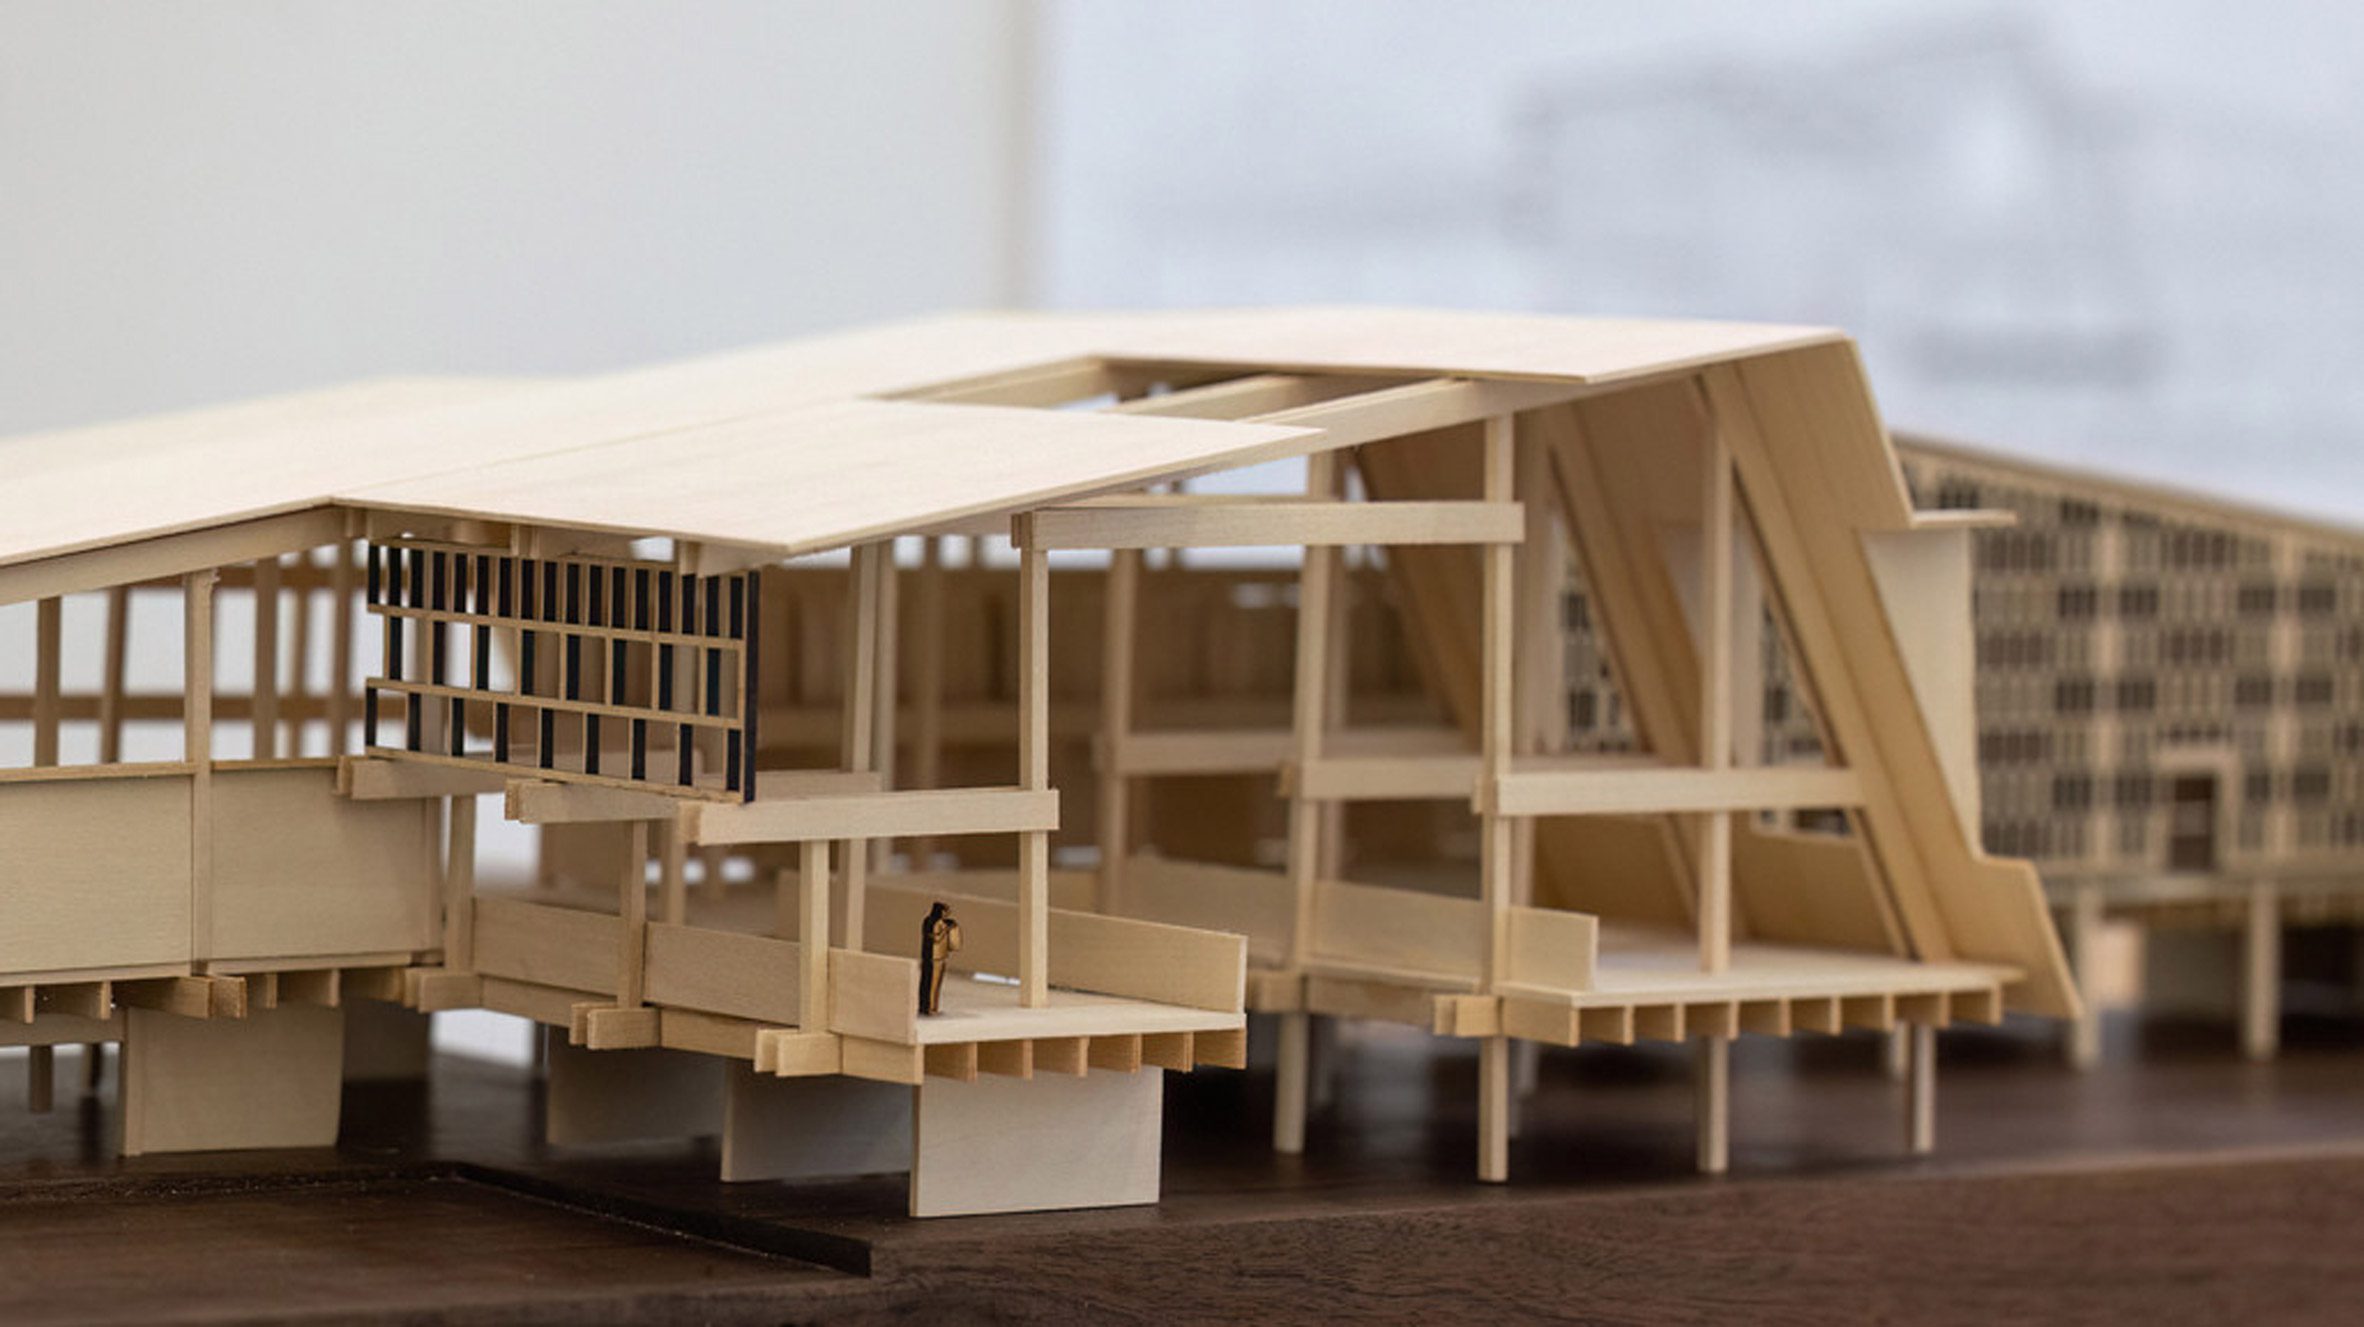 photo of a wooden architecture model